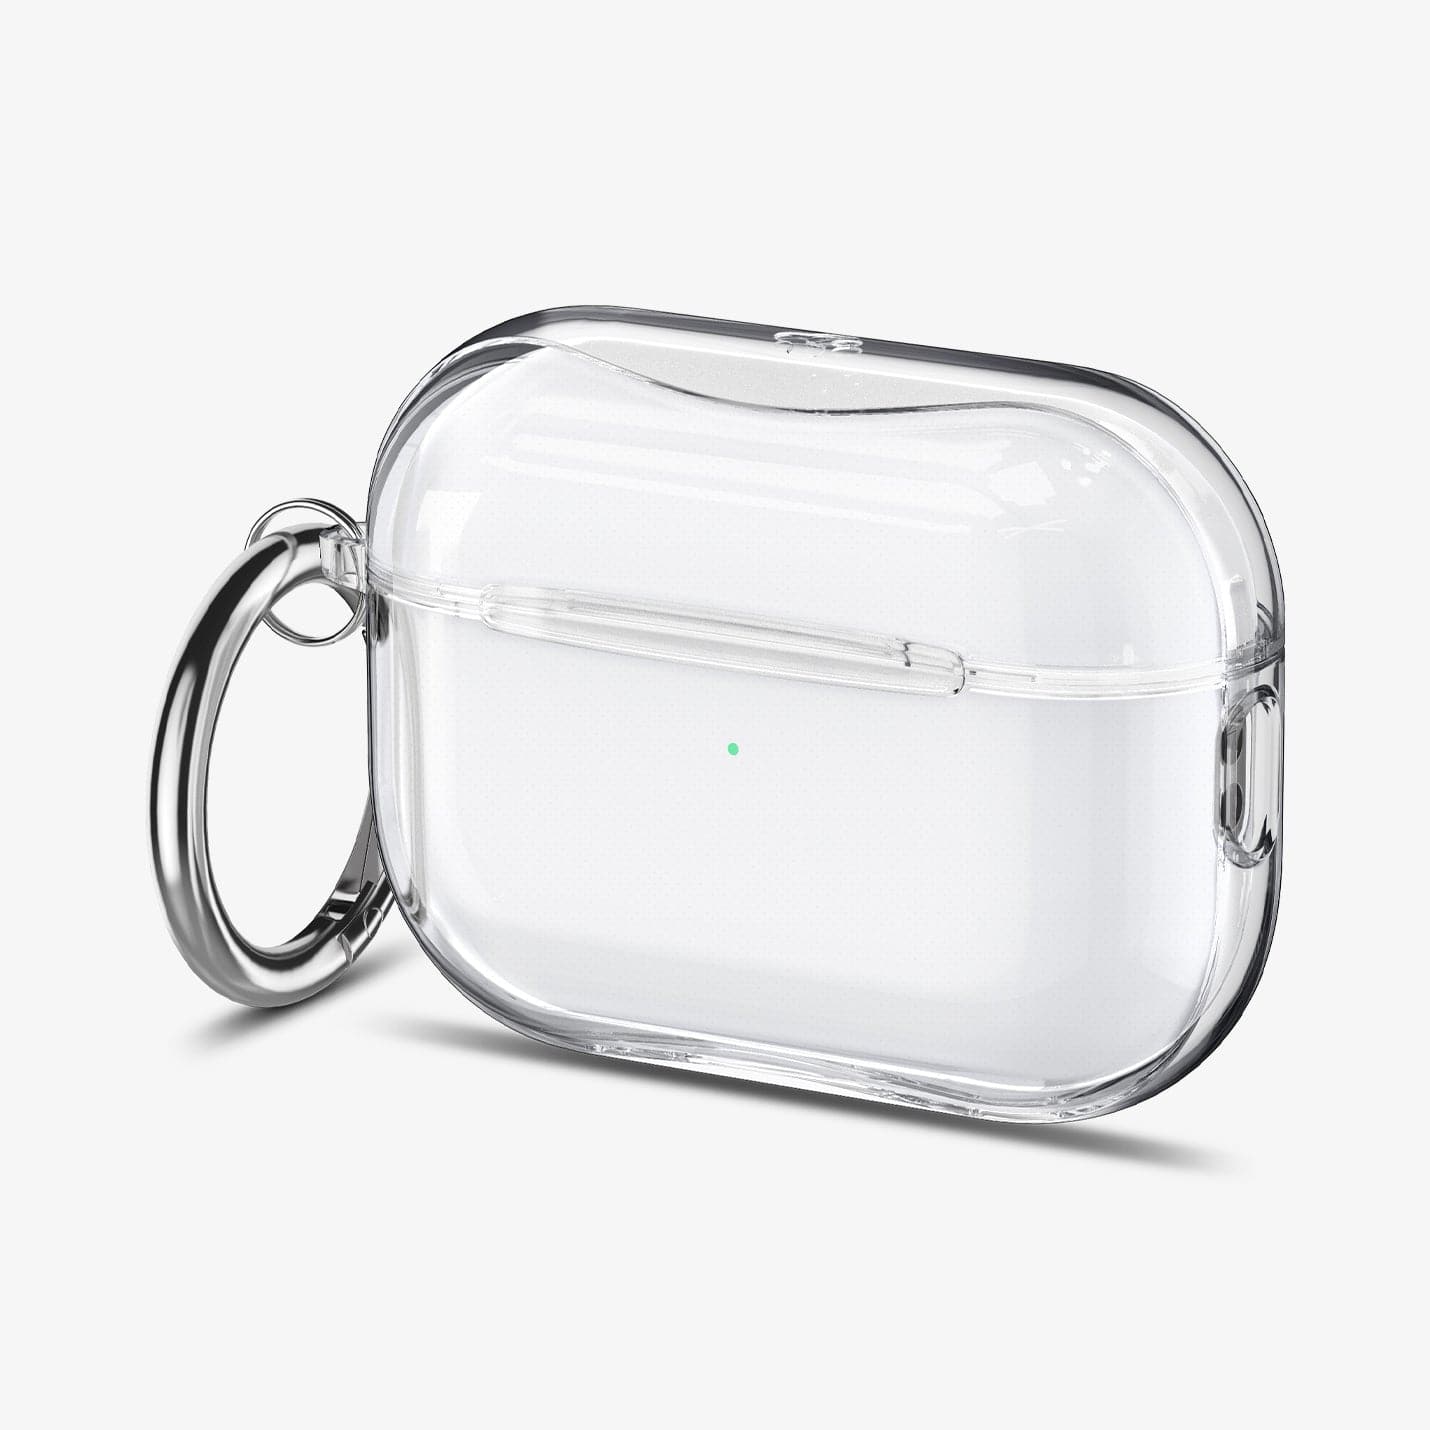 ACS05481 - Apple AirPods Pro 2 Case Ultra Hybrid in crystal clear showing the front and carabiner